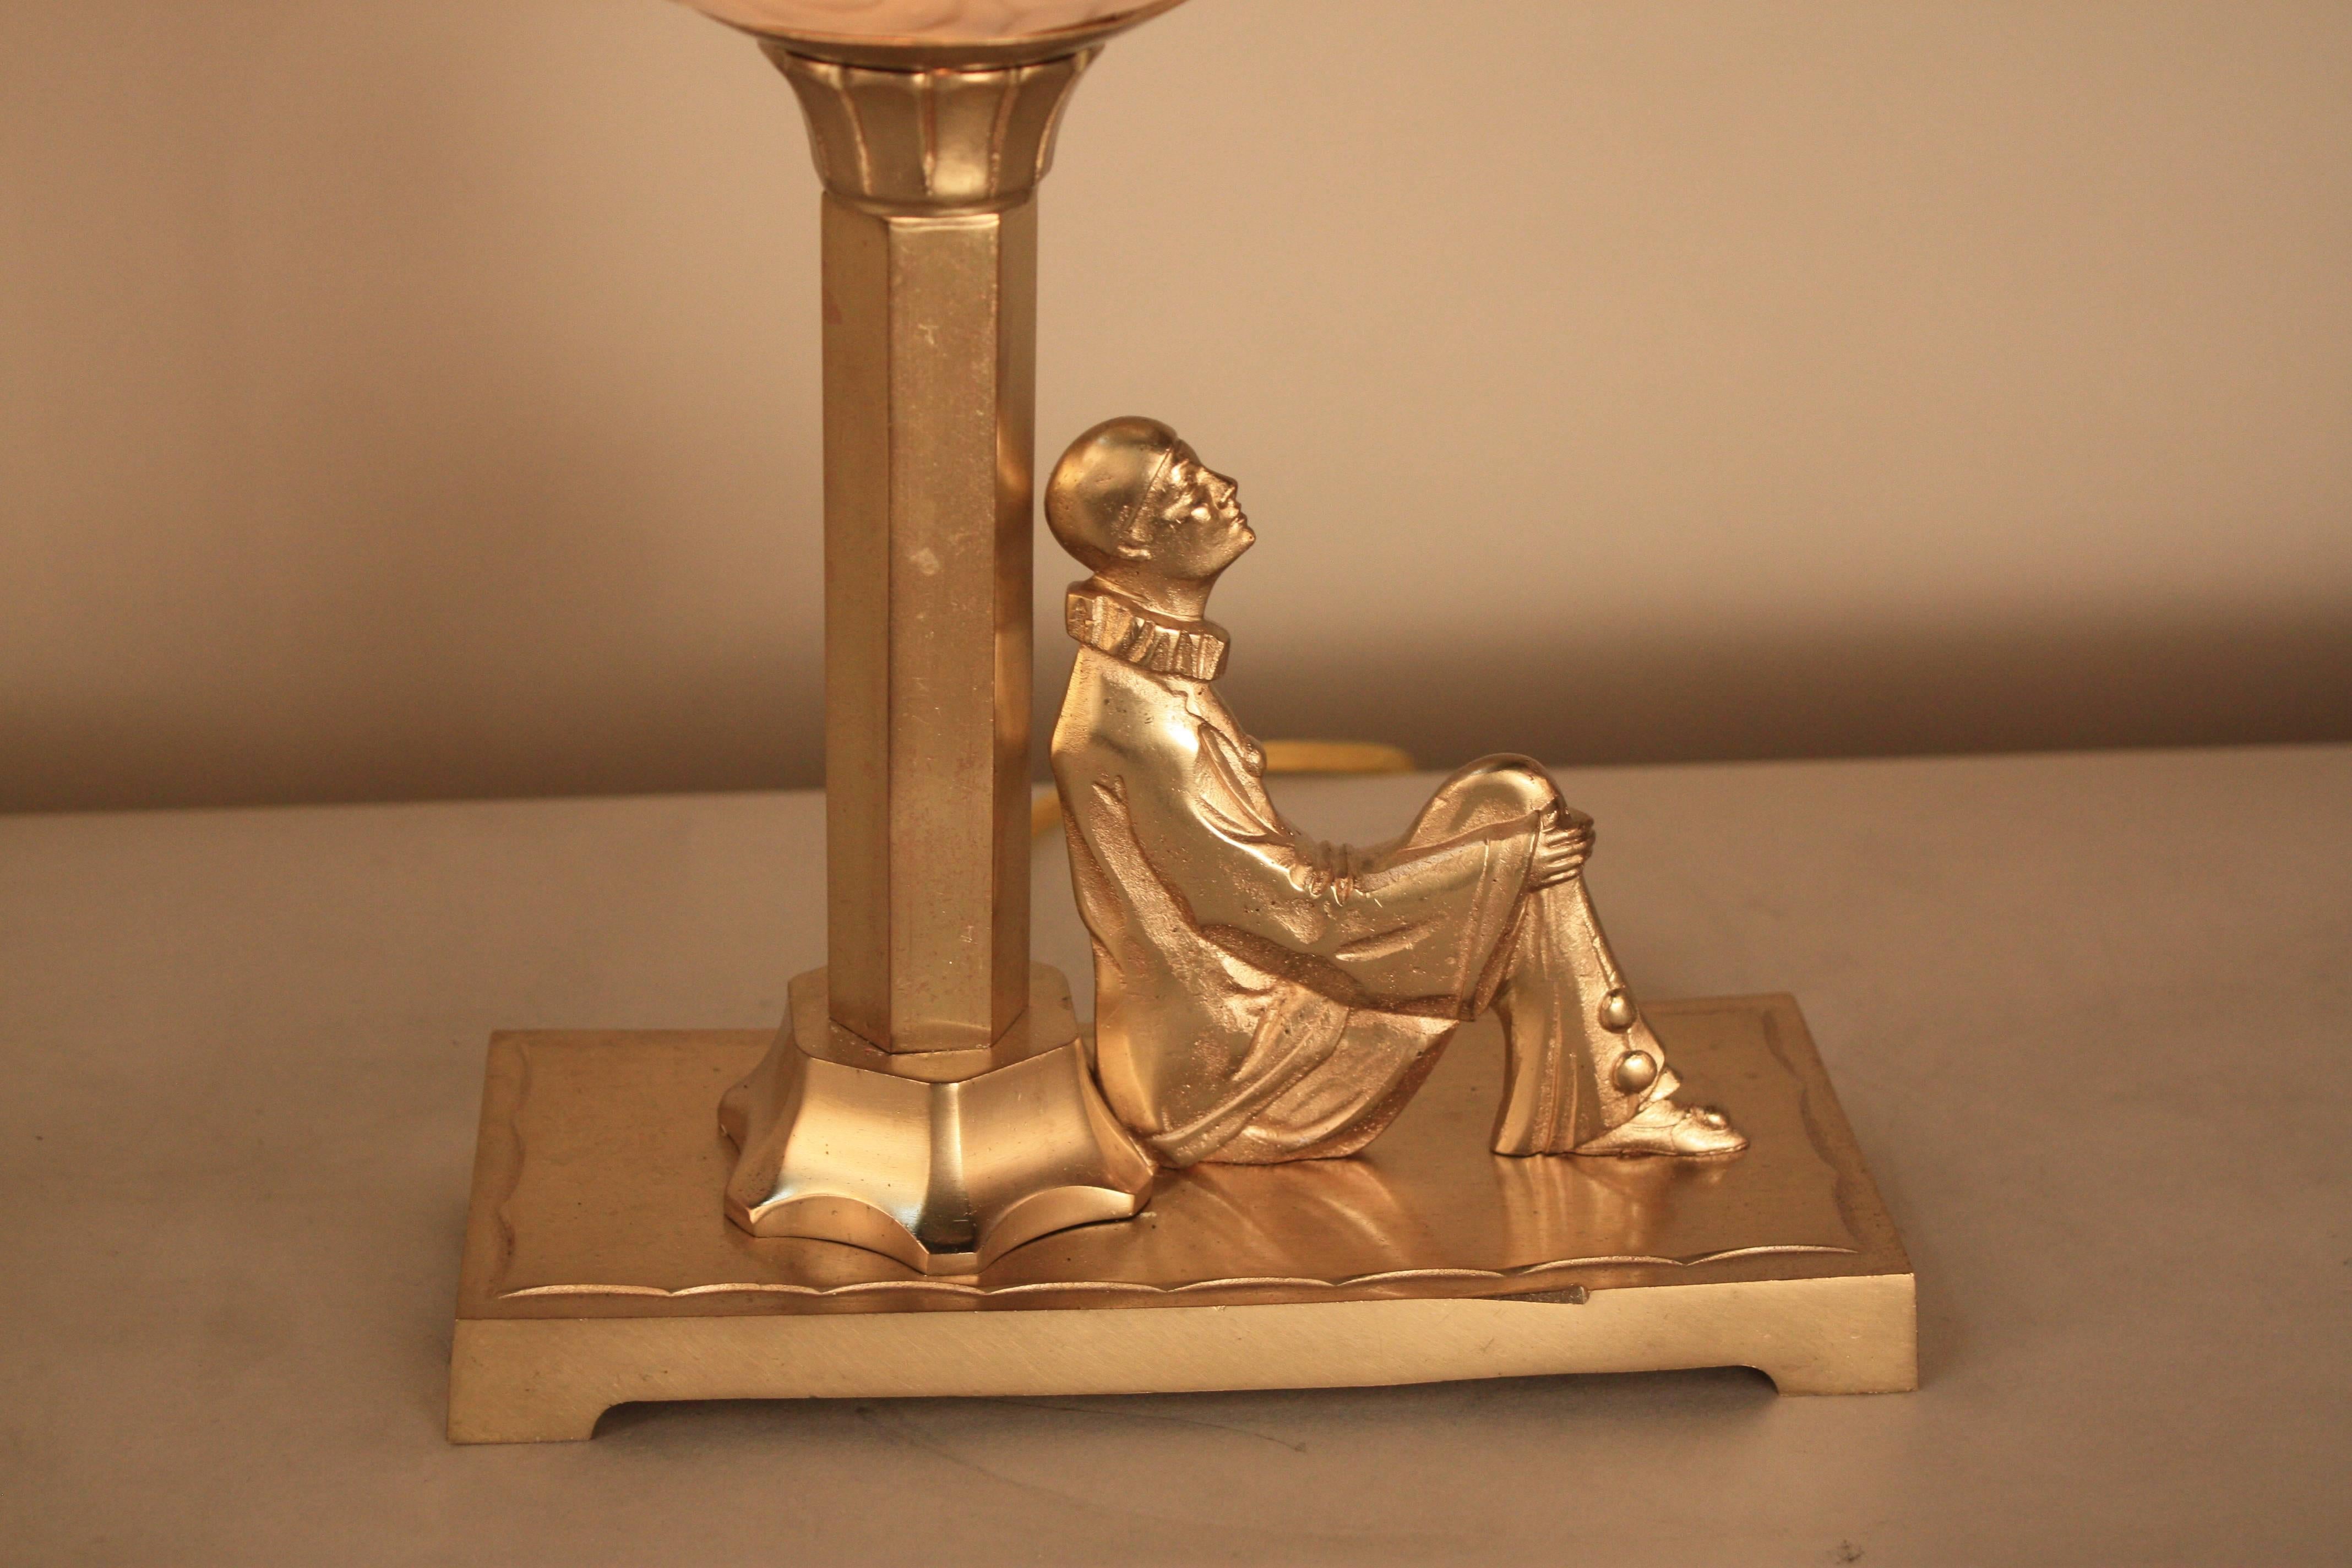 Harlequin sitting under the light, beautiful bronze table lamp with textured glass shade.